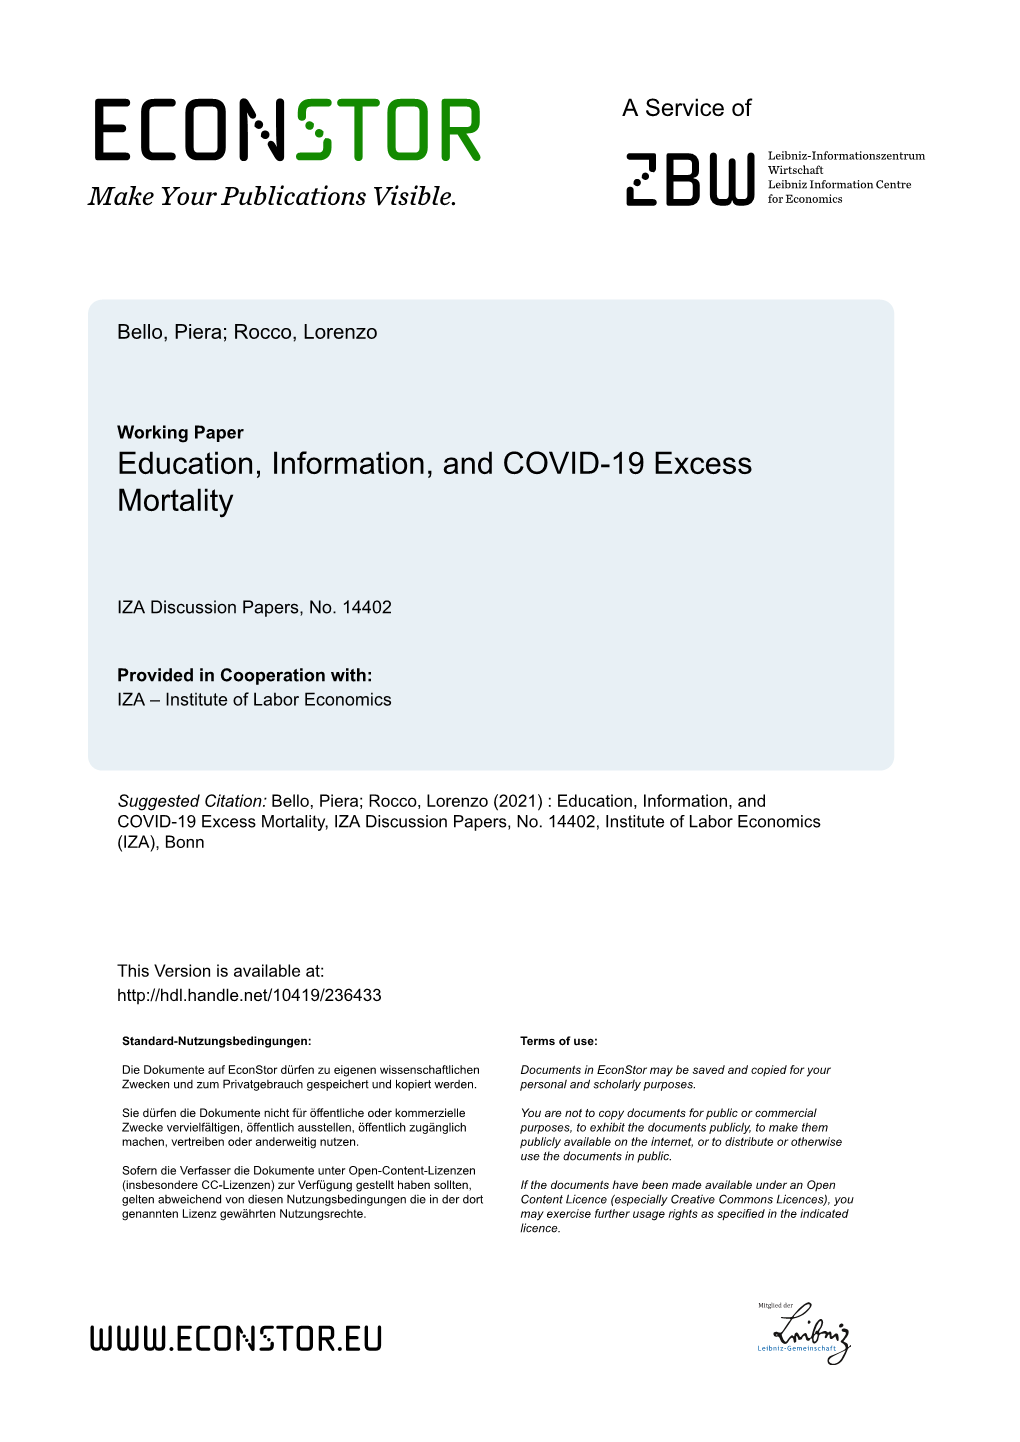 Education, Information, and COVID-19 Excess Mortality